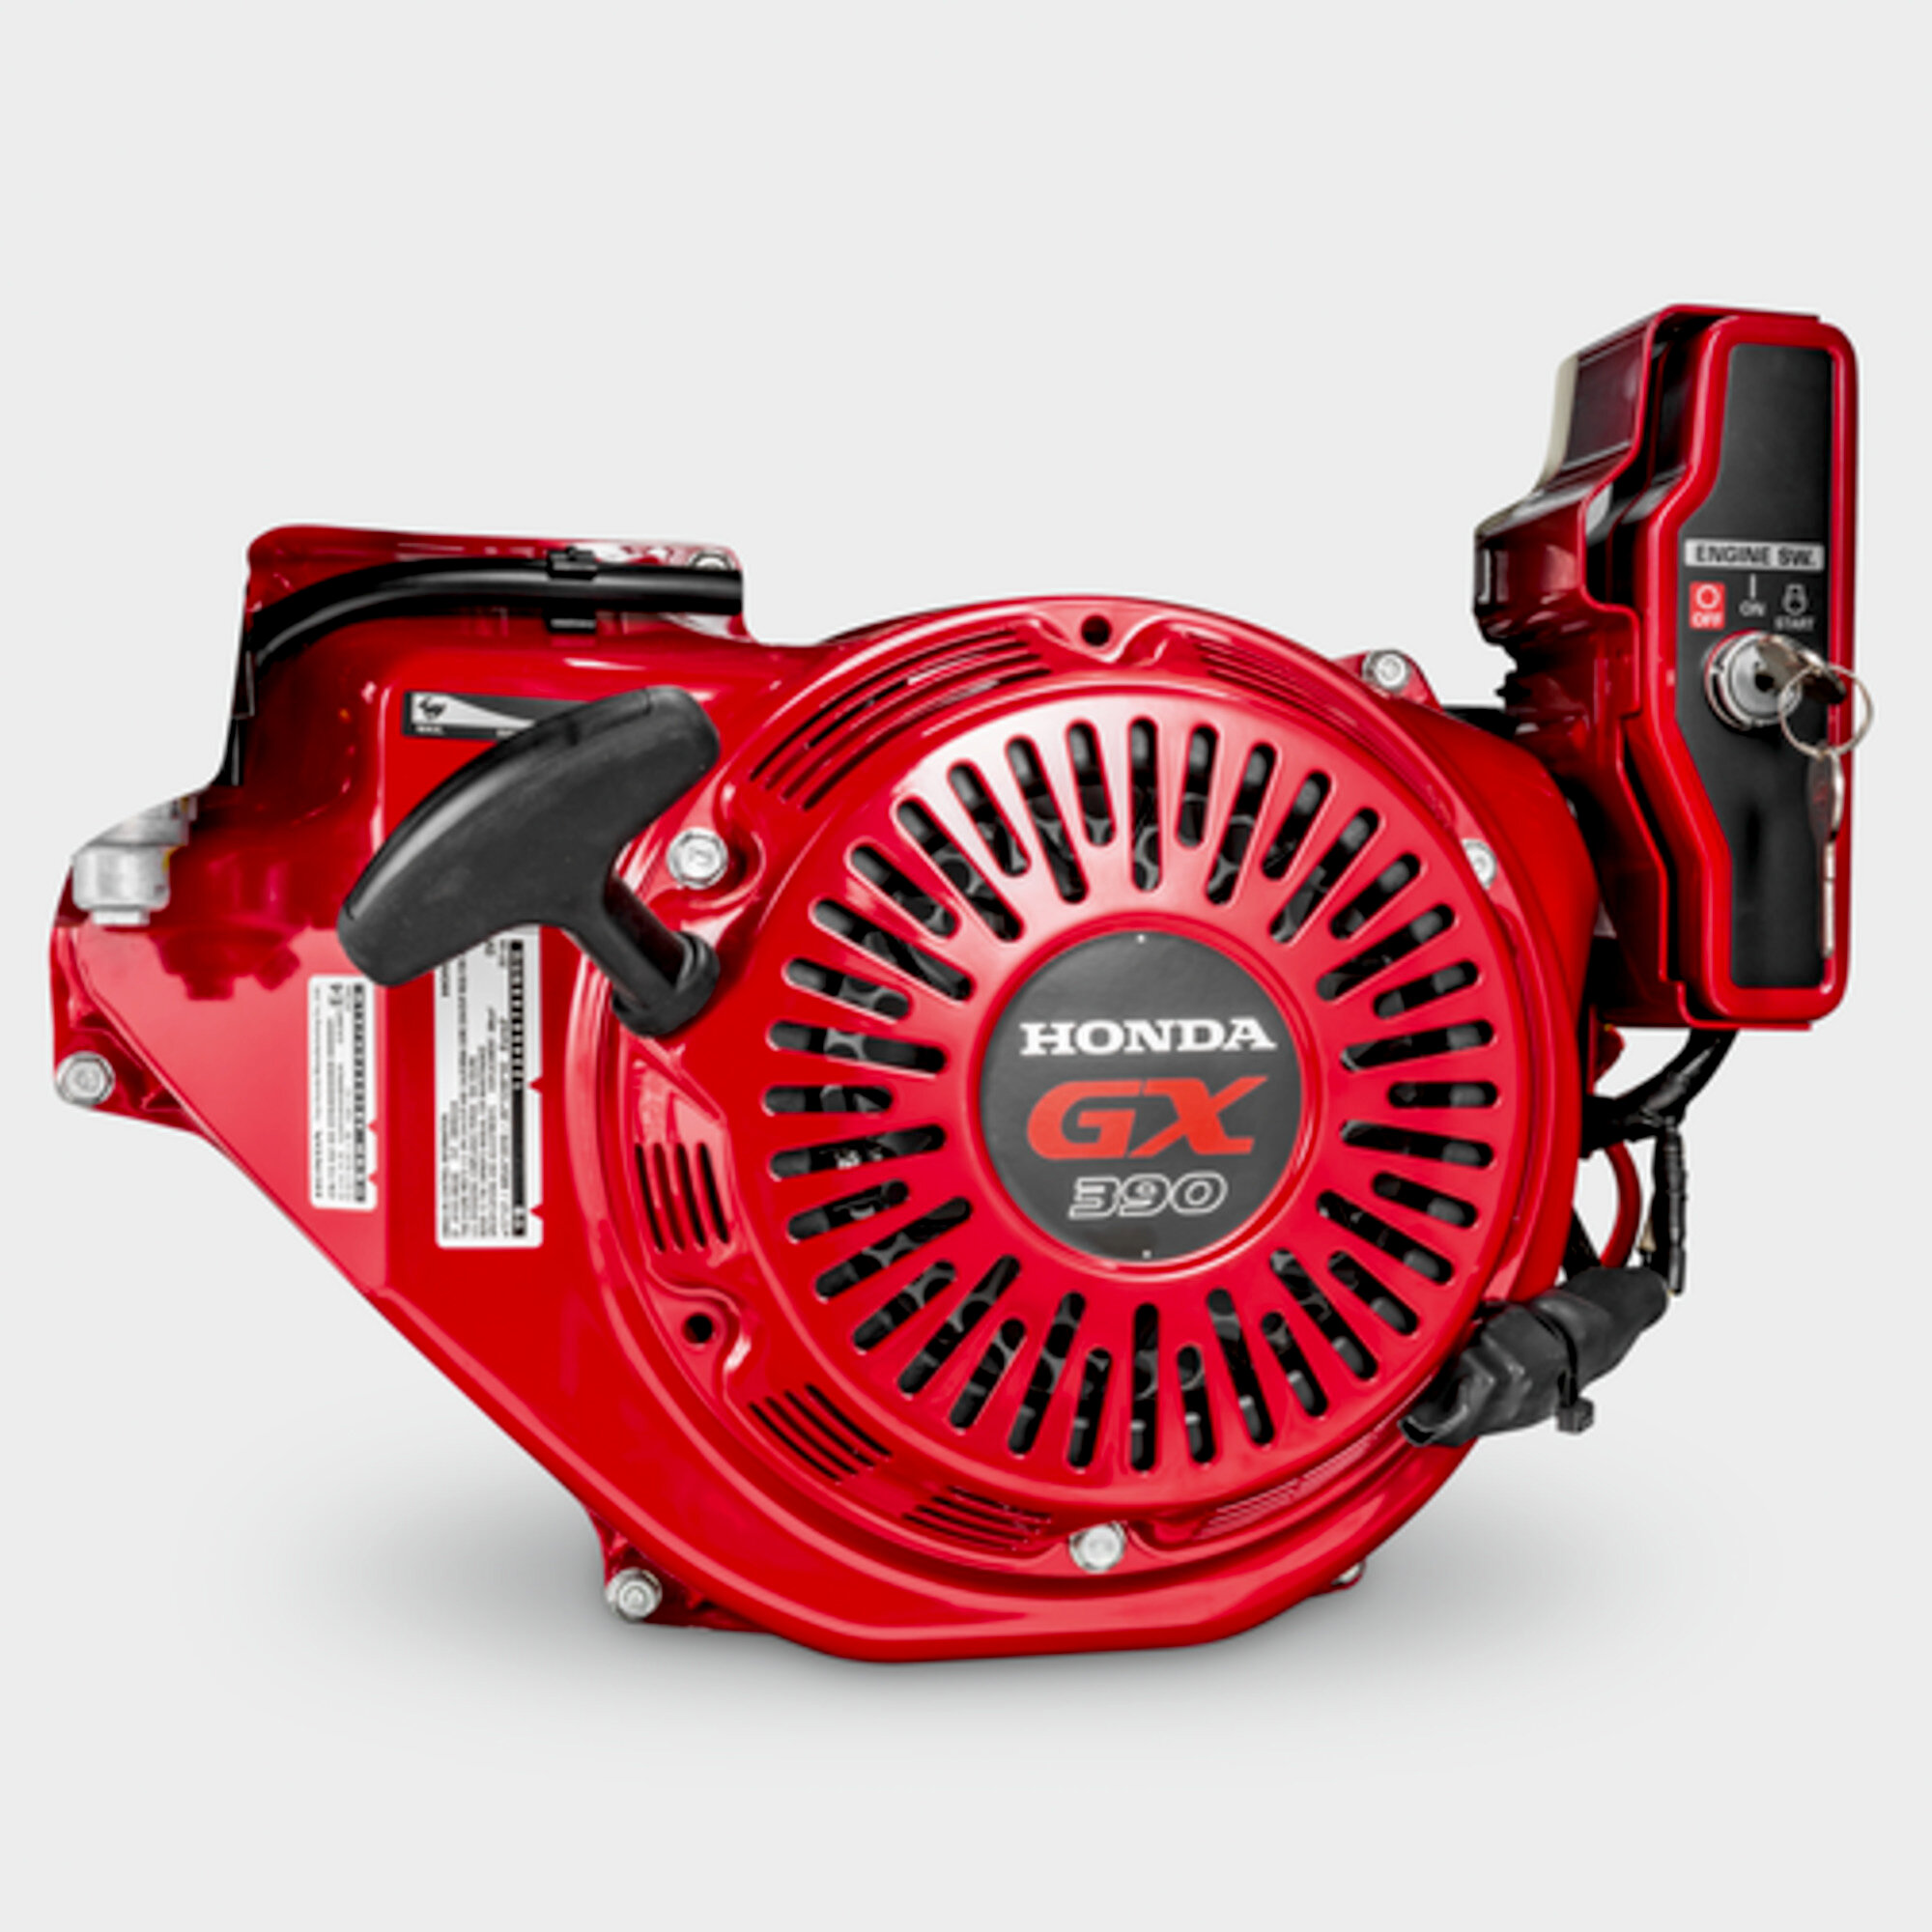 High pressure cleaner HDS 1000 BE: Powerful petrol engine